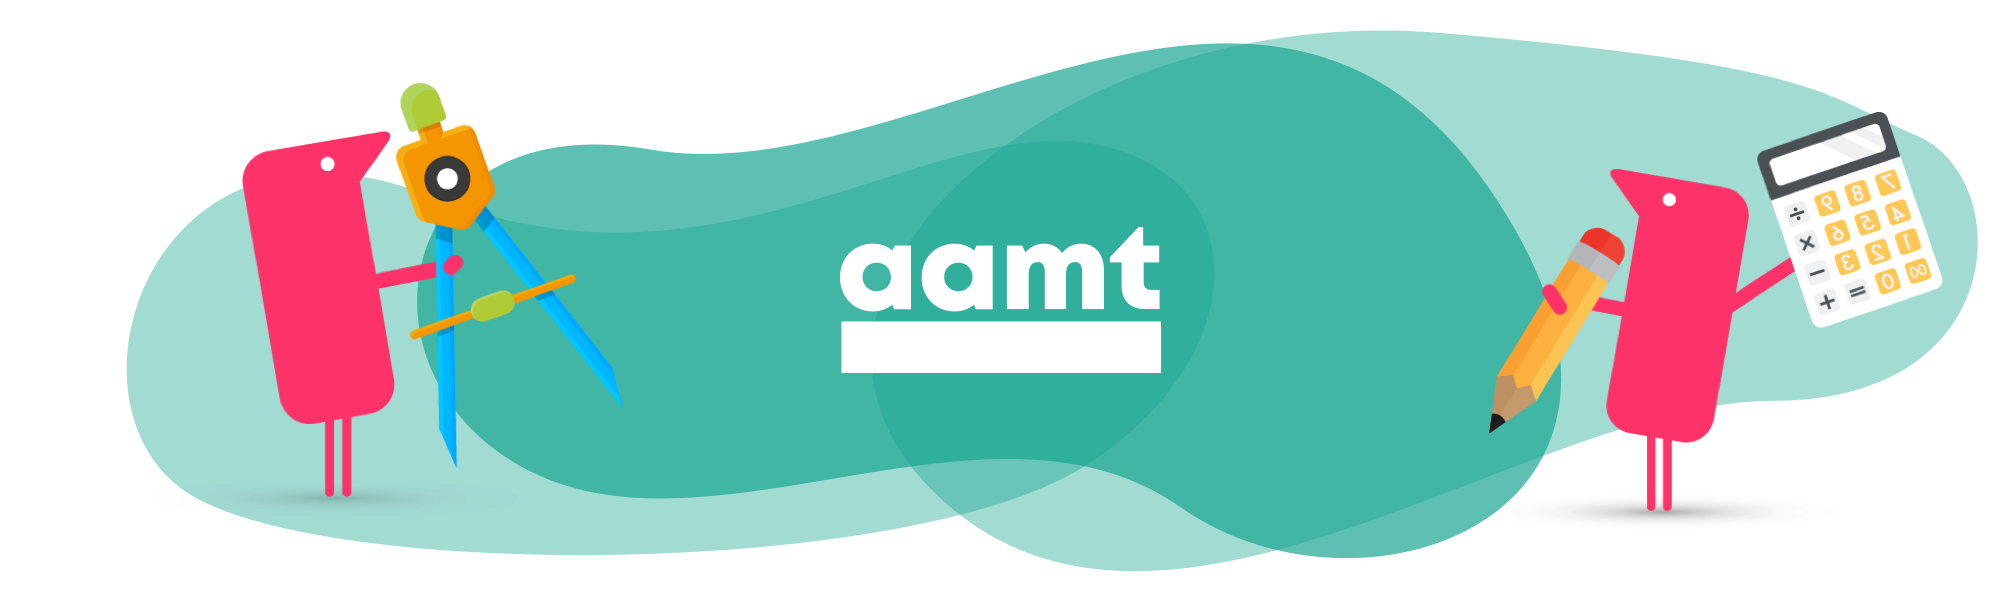 AAMT Logo, with texthelpers using a calculator, a pencil and a compass.